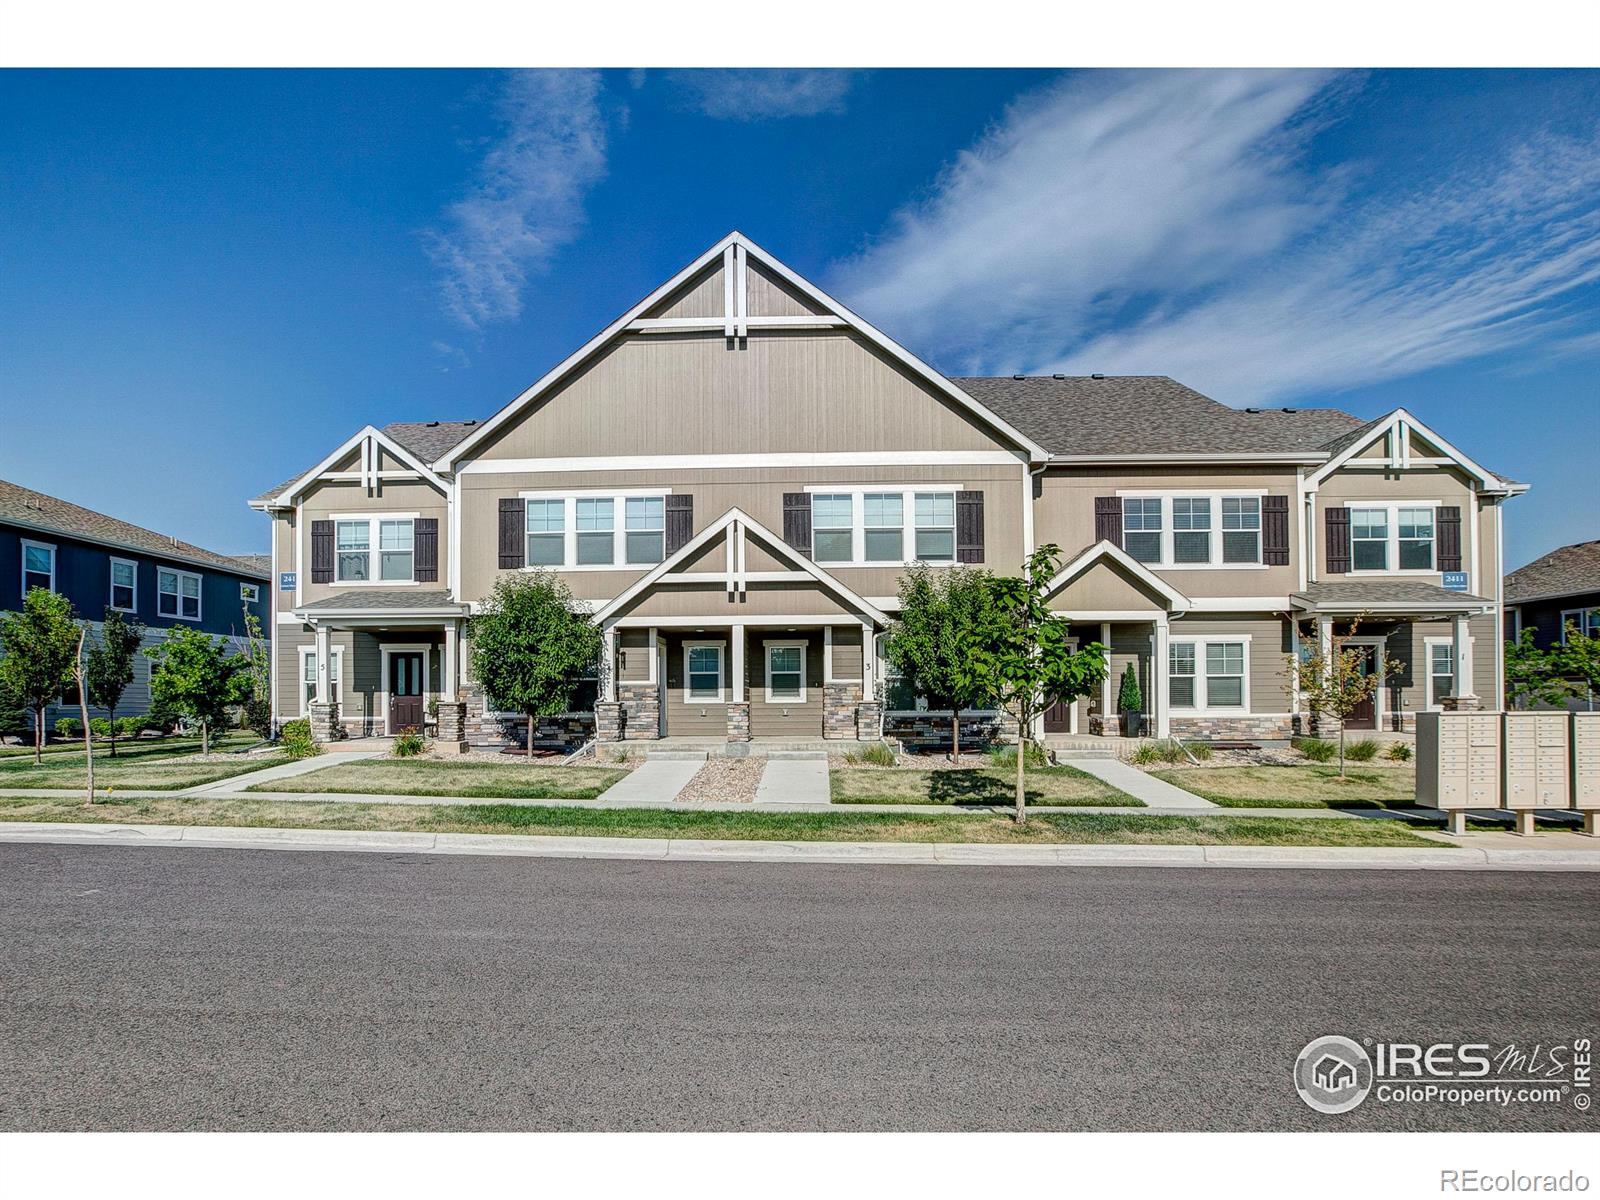 2411  Crown View Drive, fort collins MLS: 4567891014527 Beds: 3 Baths: 3 Price: $479,000